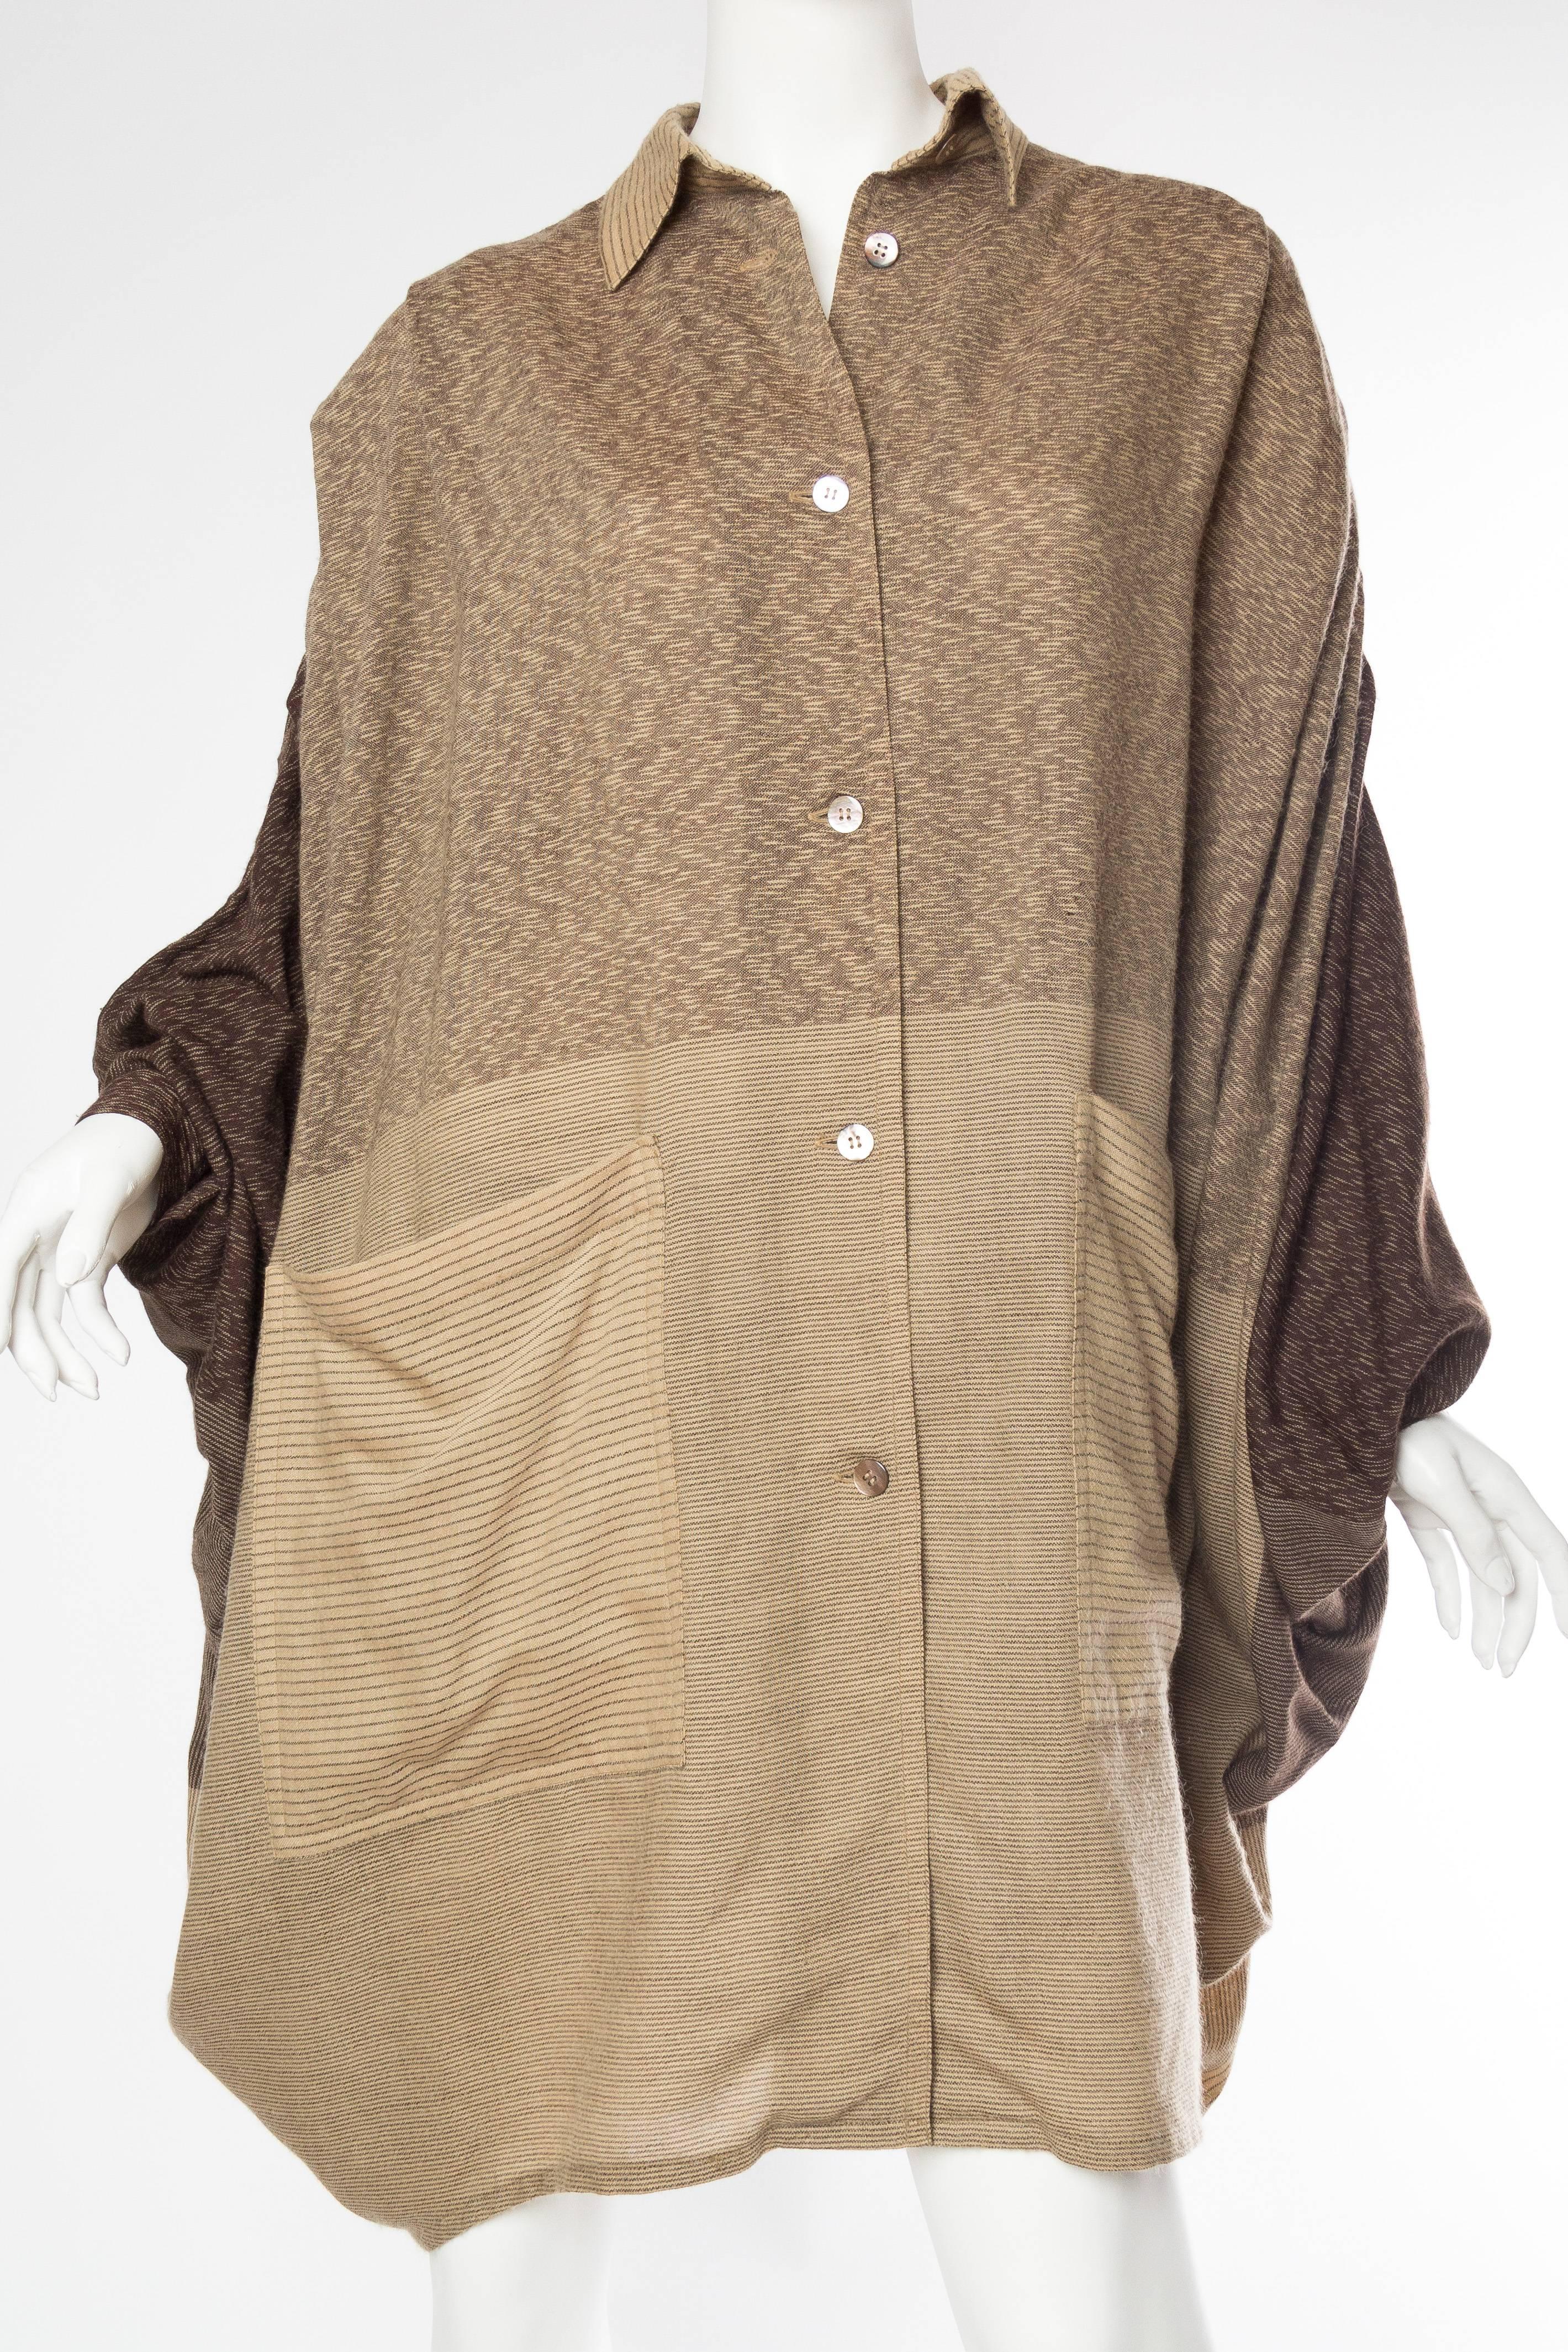 Women's 1980S ISSEY MIYAKE Tan & Brown Wool Blend Oversized Shirt Pleated Pants Ensemble For Sale